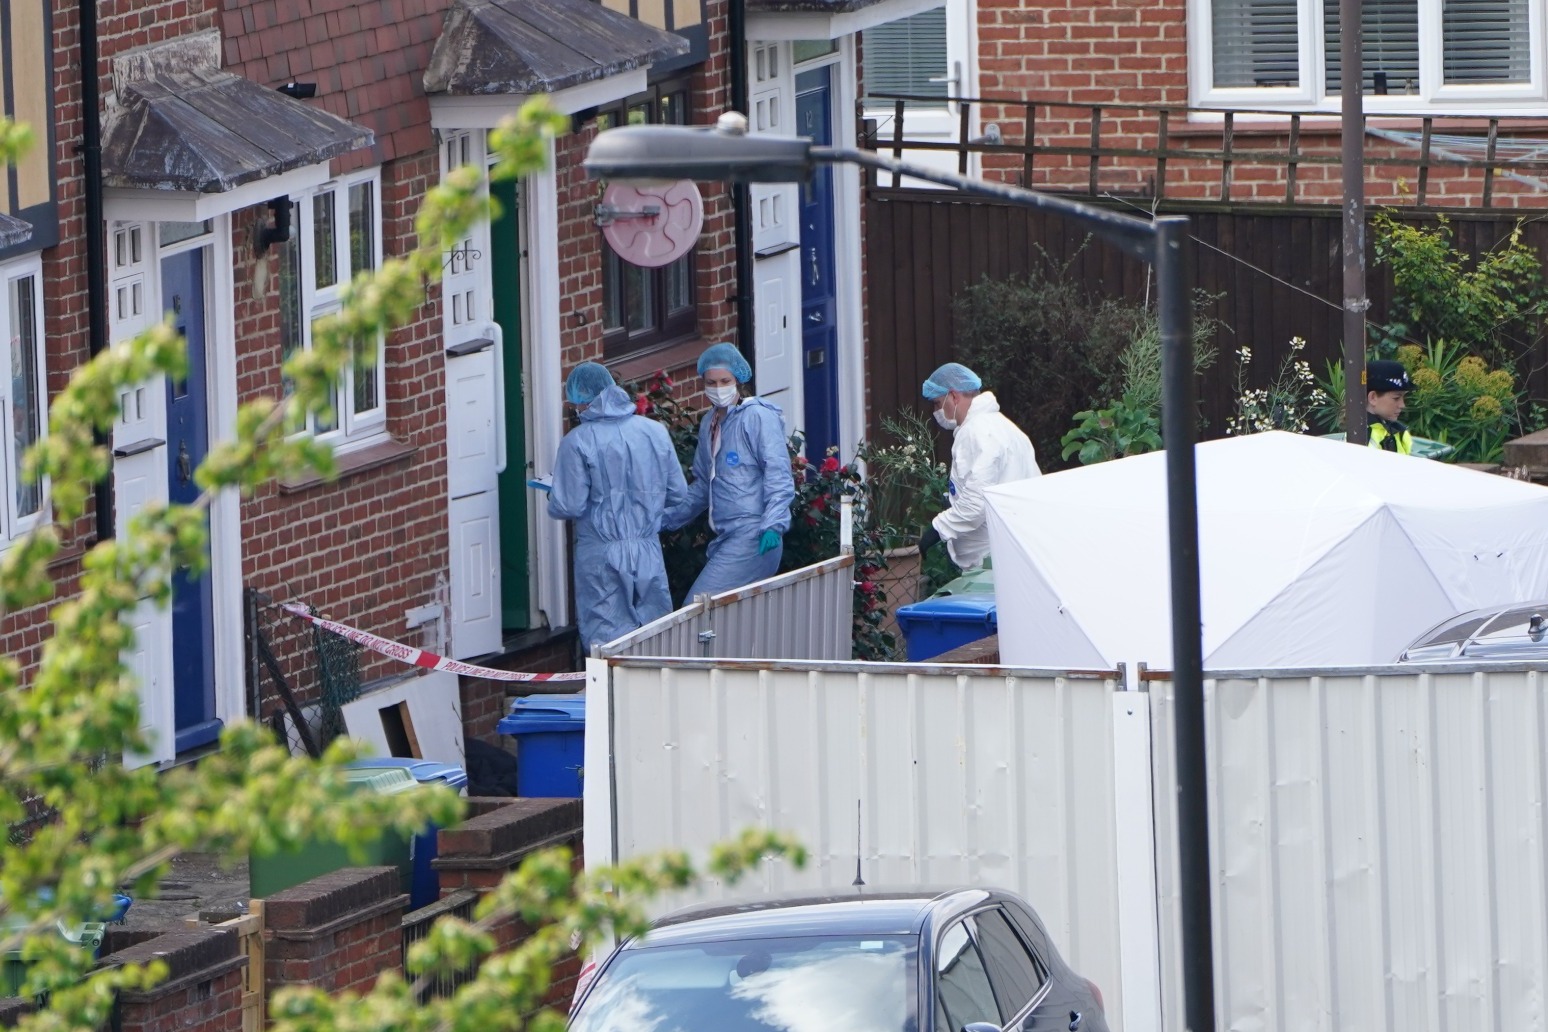 Man charged with murder of four people in Bermondsey due in court 